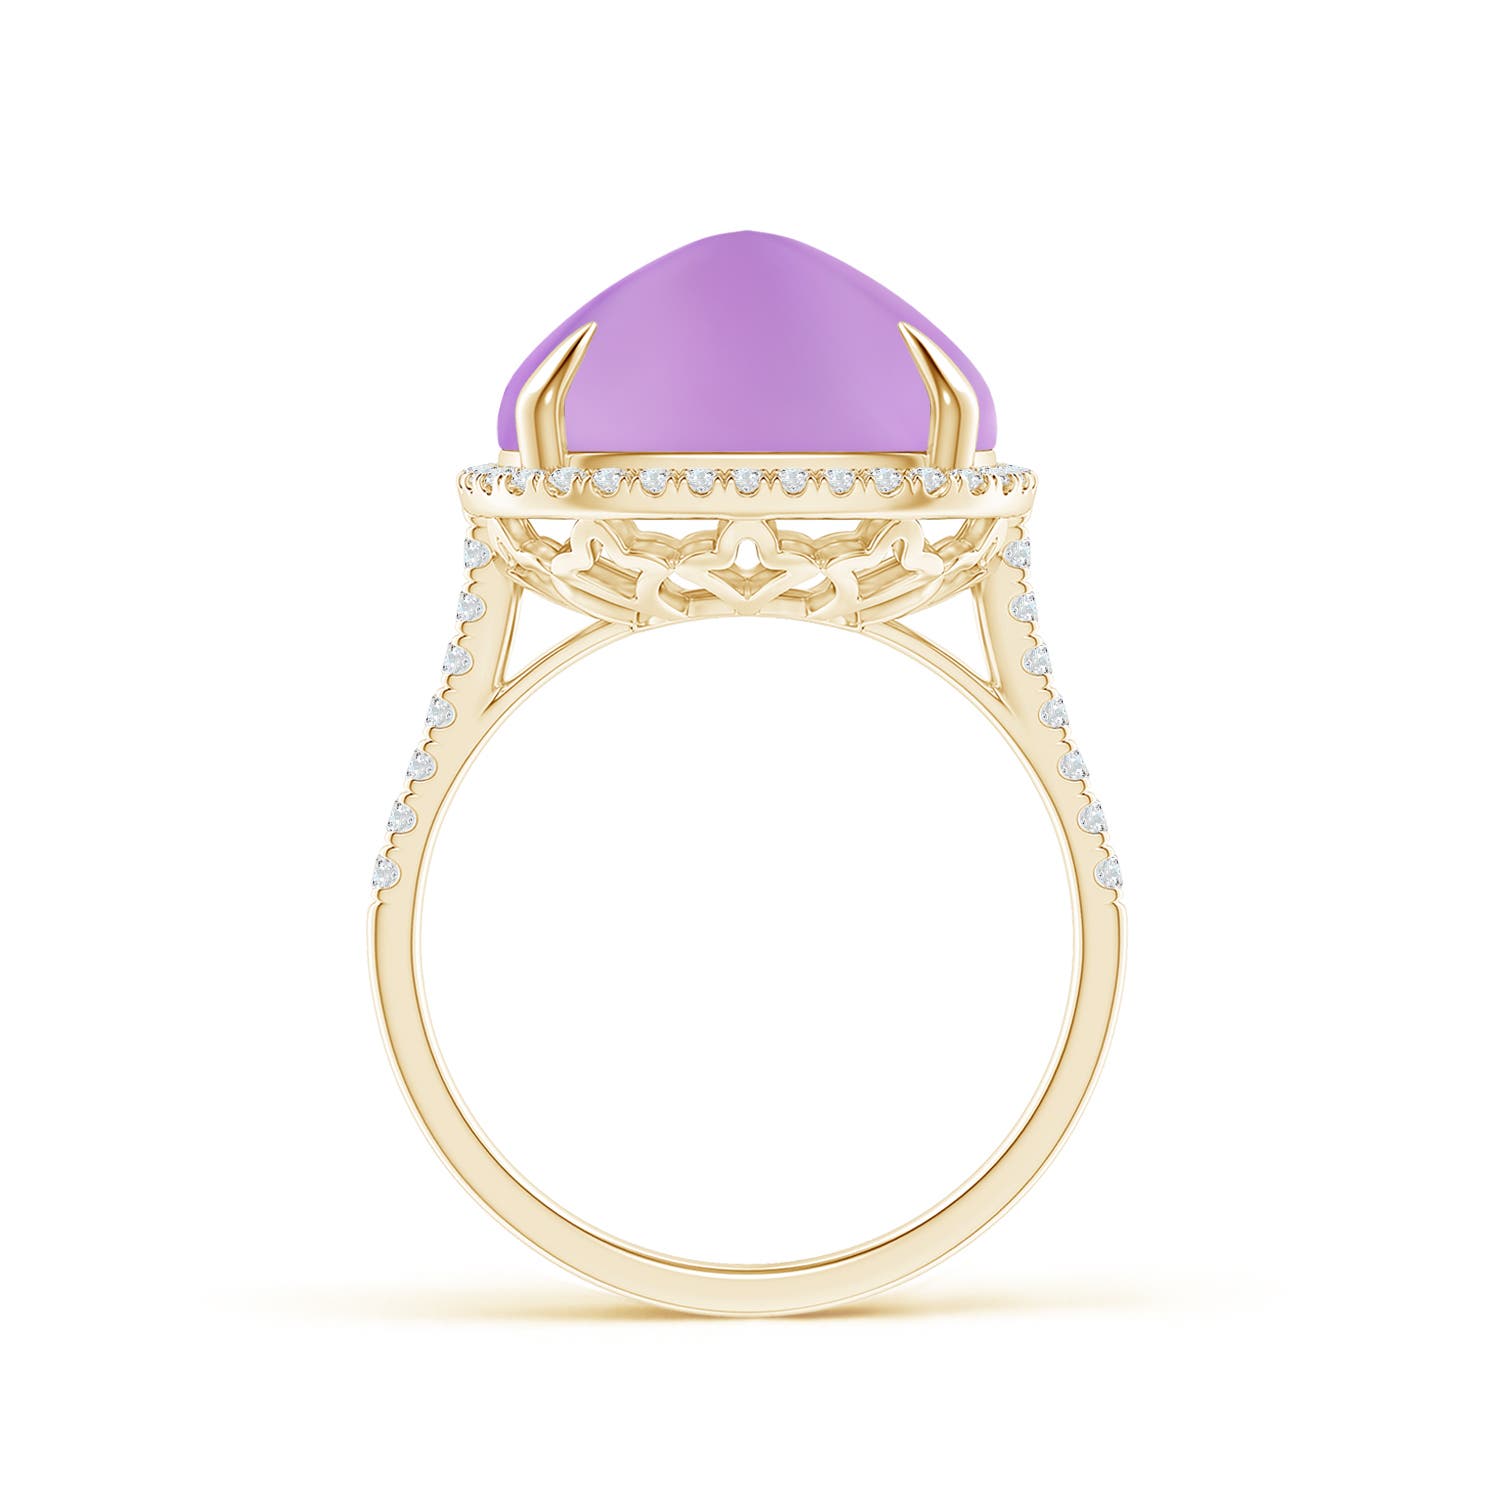 A - Amethyst / 10.34 CT / 14 KT Yellow Gold